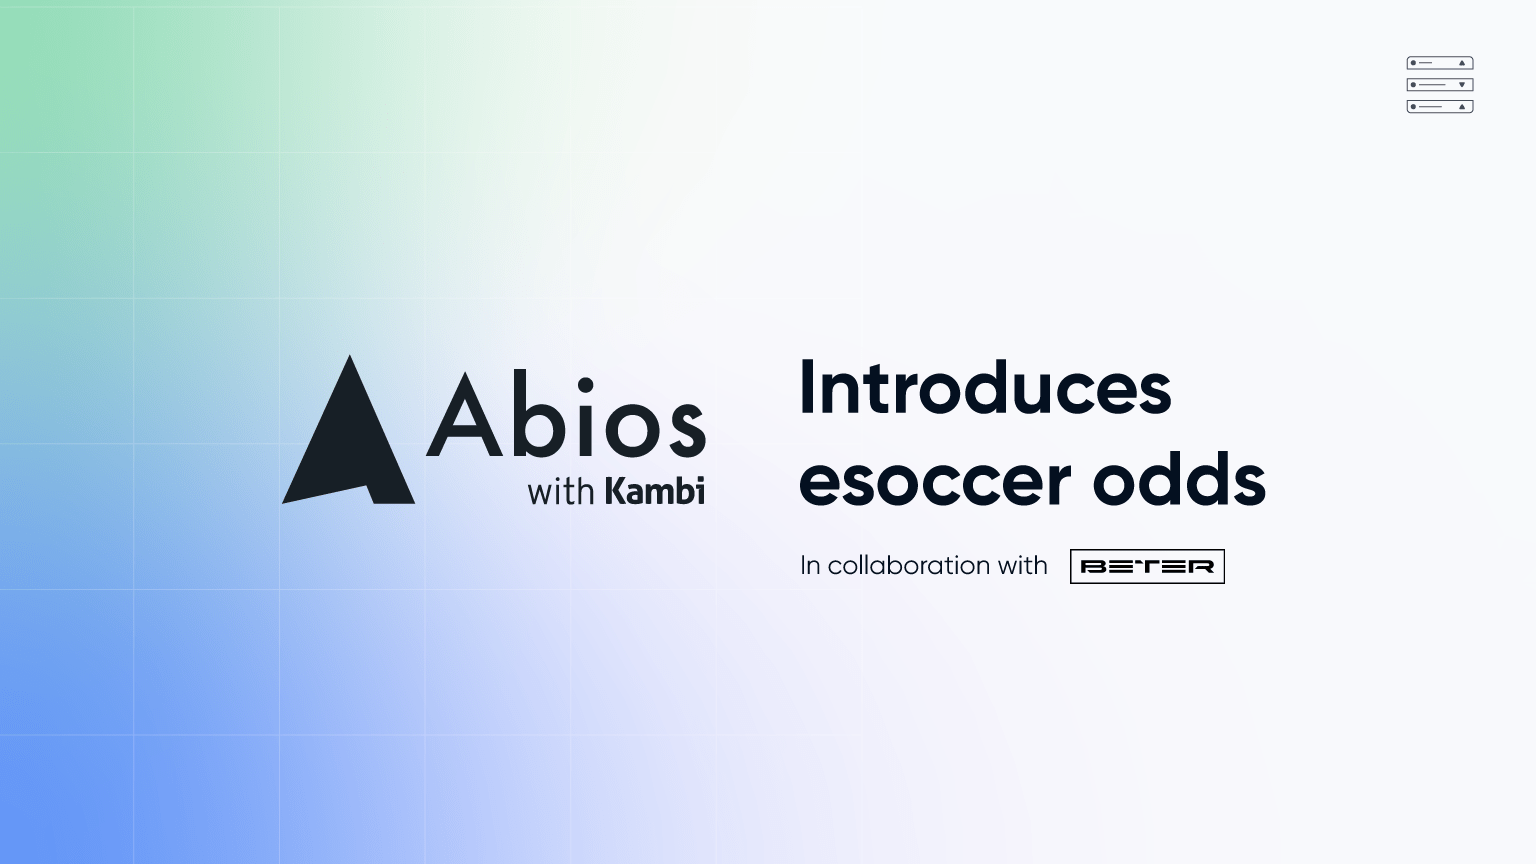 abios-fills-the-holes-in-the-seasonal-sports-calendar-with-engaging-esoccer,-provided-by-beter